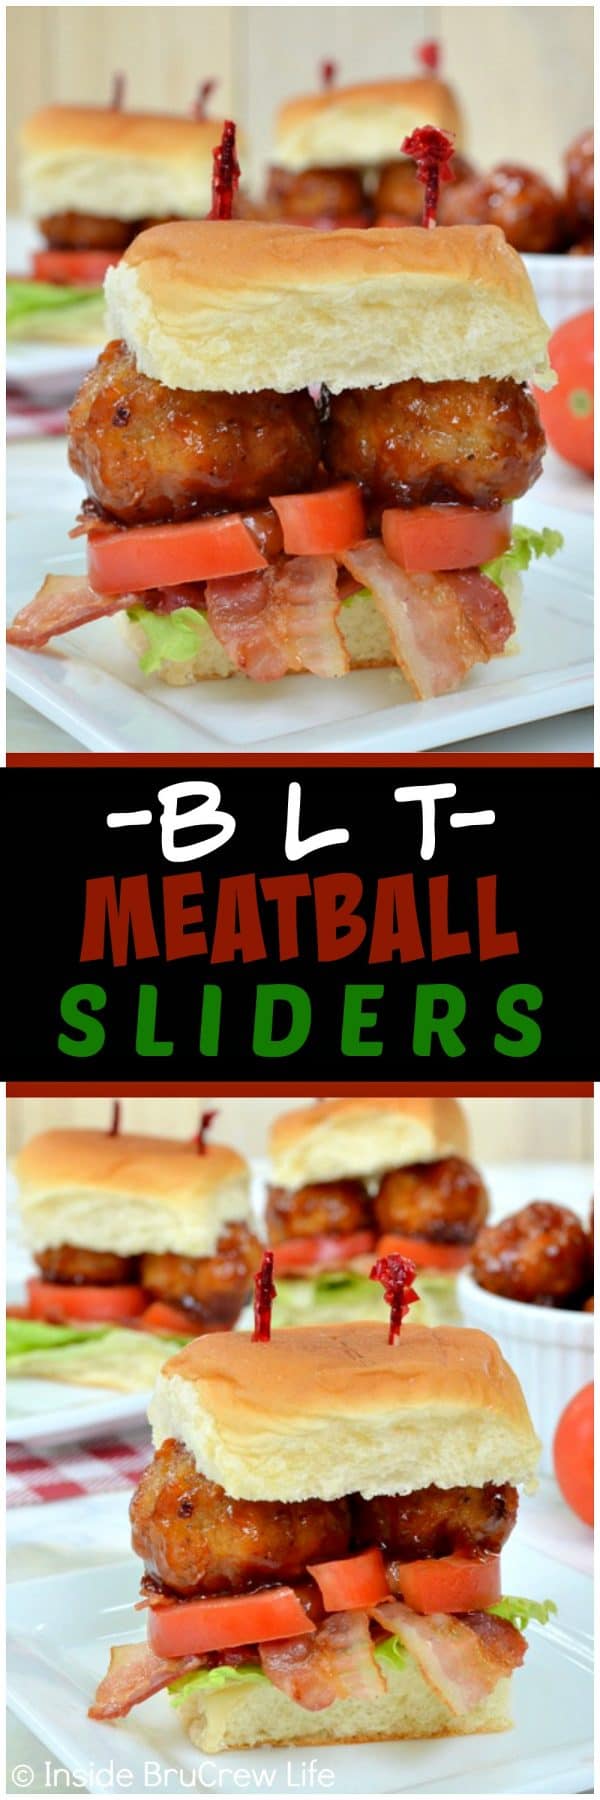 BLT Meatball Sliders - homemade barbecue meatballs inside a soft roll with bacon, lettuce, and tomato. Perfect recipe for an easy dinner or game day party appetizer!